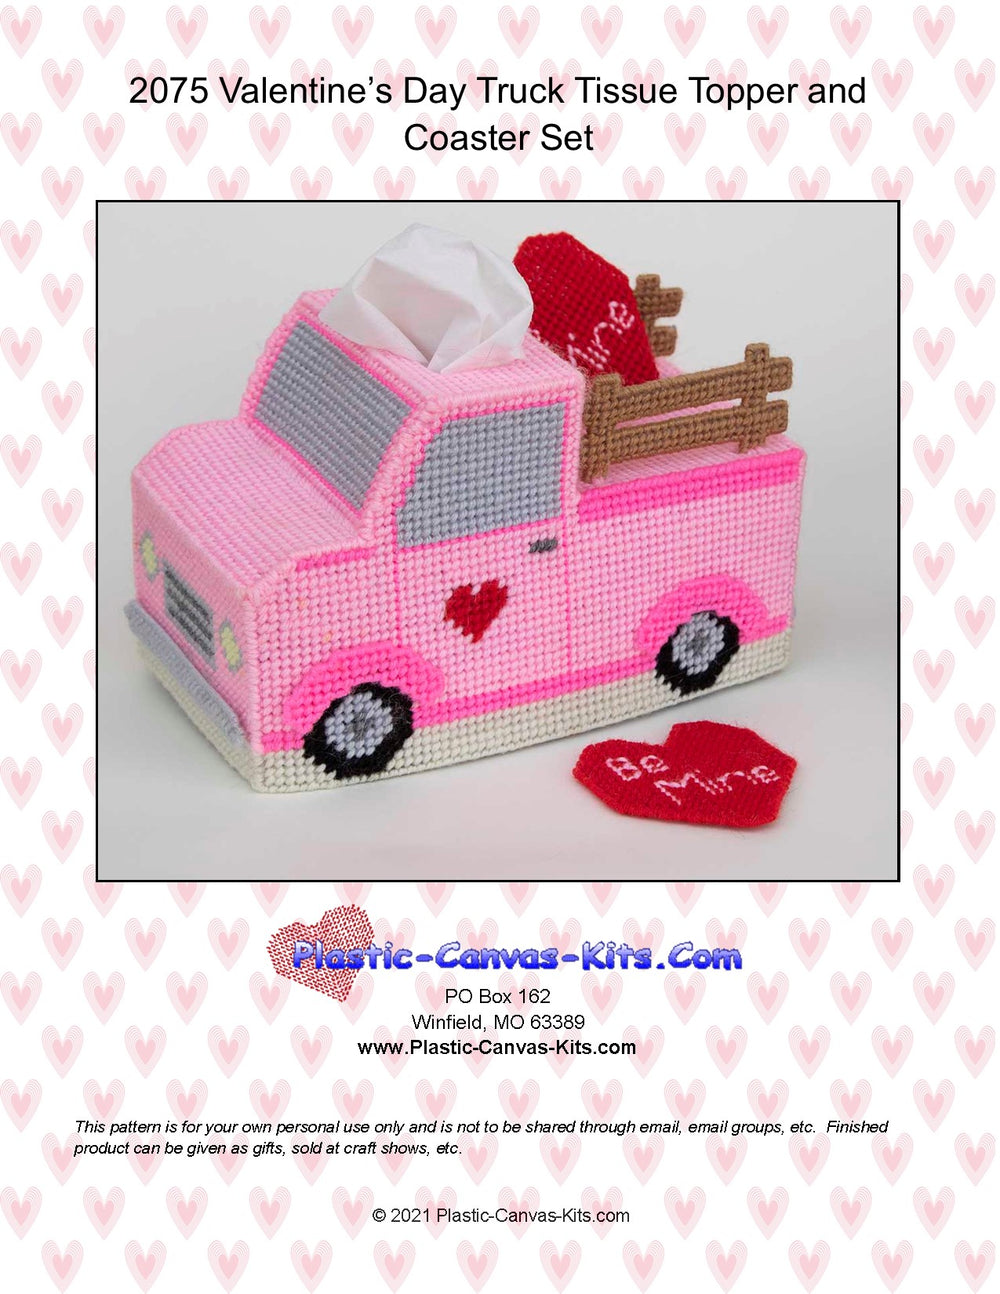 Valentine's Day Truck Tissue Topper and Coaster Set